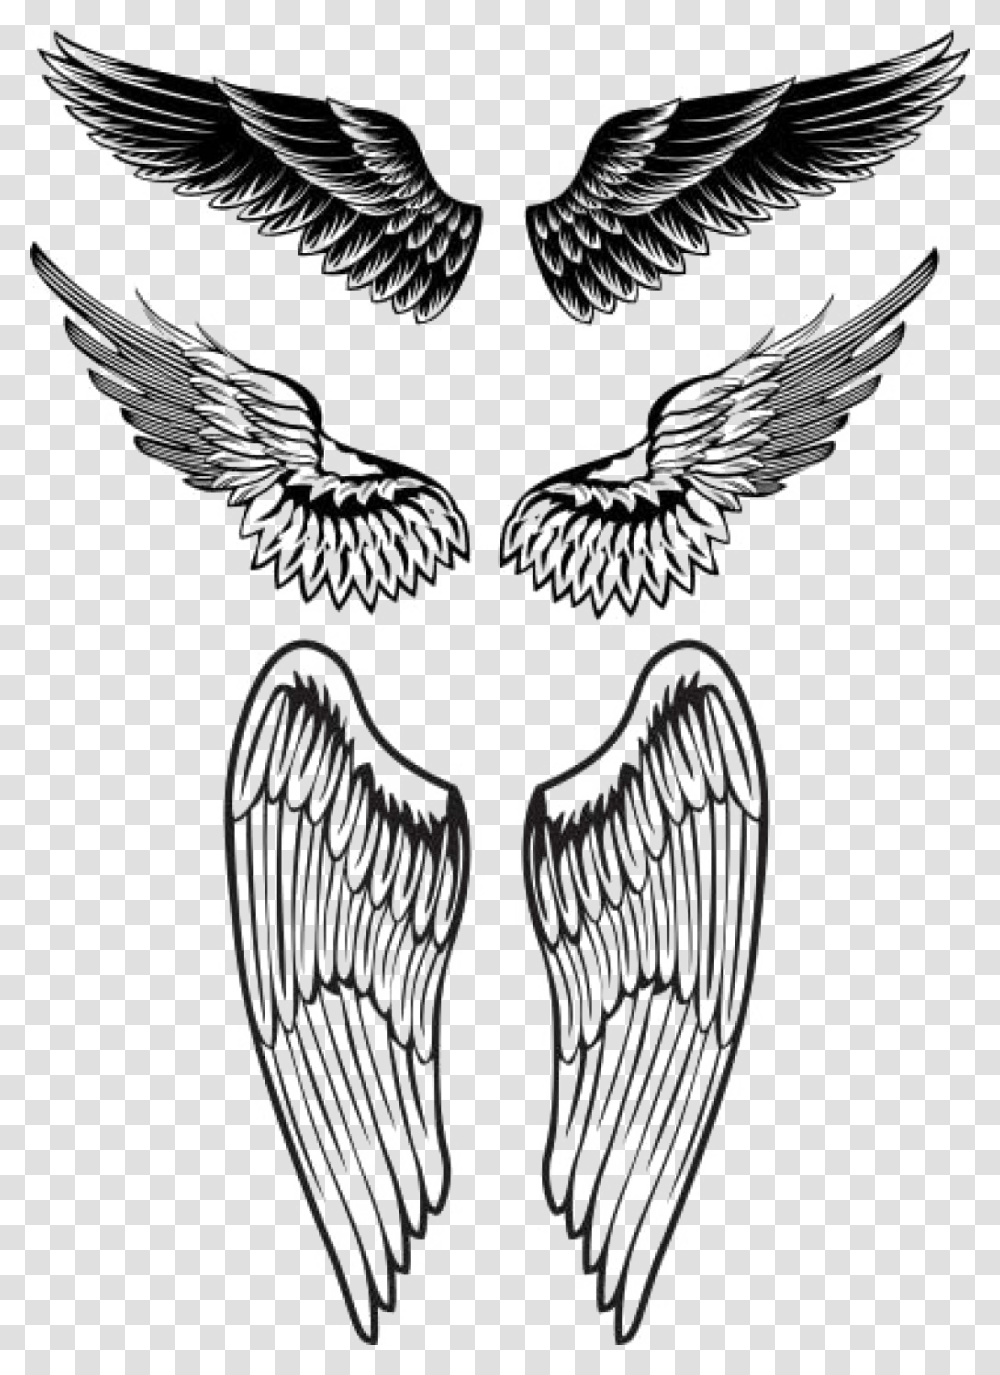 Wings Tattoo Background Image Wings On Chest Tattoo Small, Bird, Animal, Drawing Transparent Png